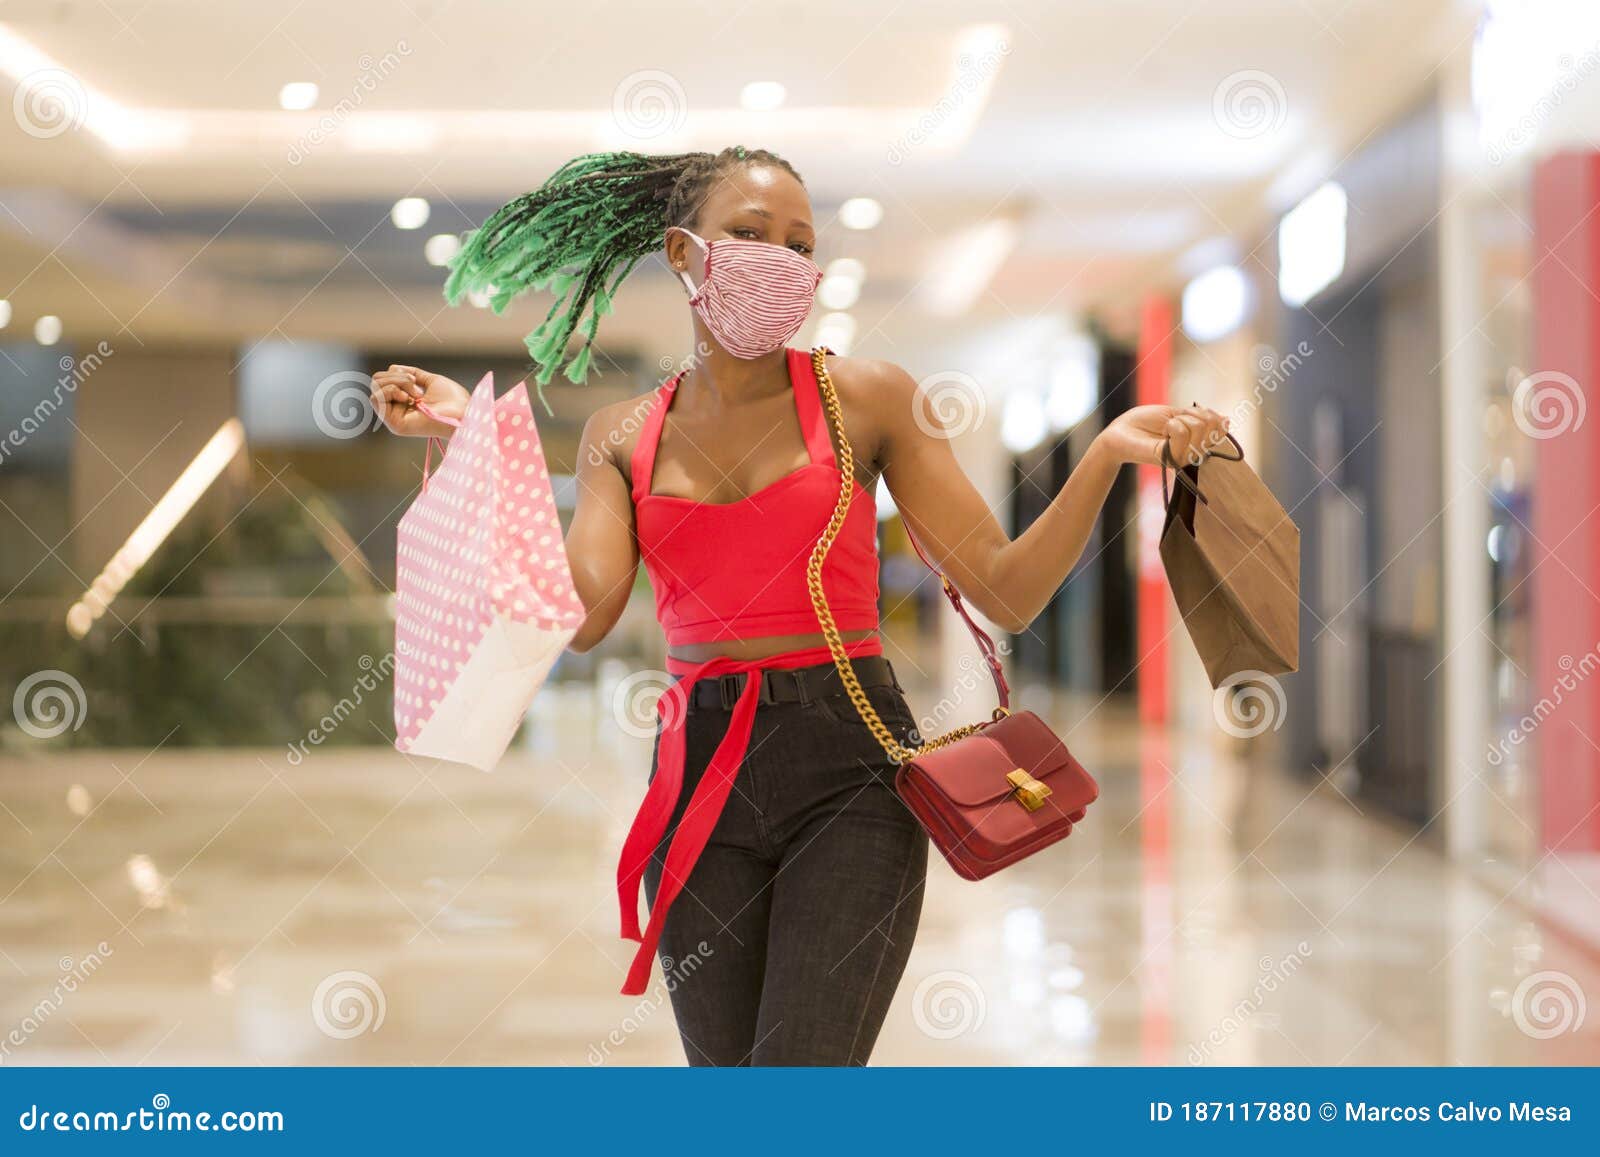 Young African American Woman at Shopping Mall in New Normal after Covid ...